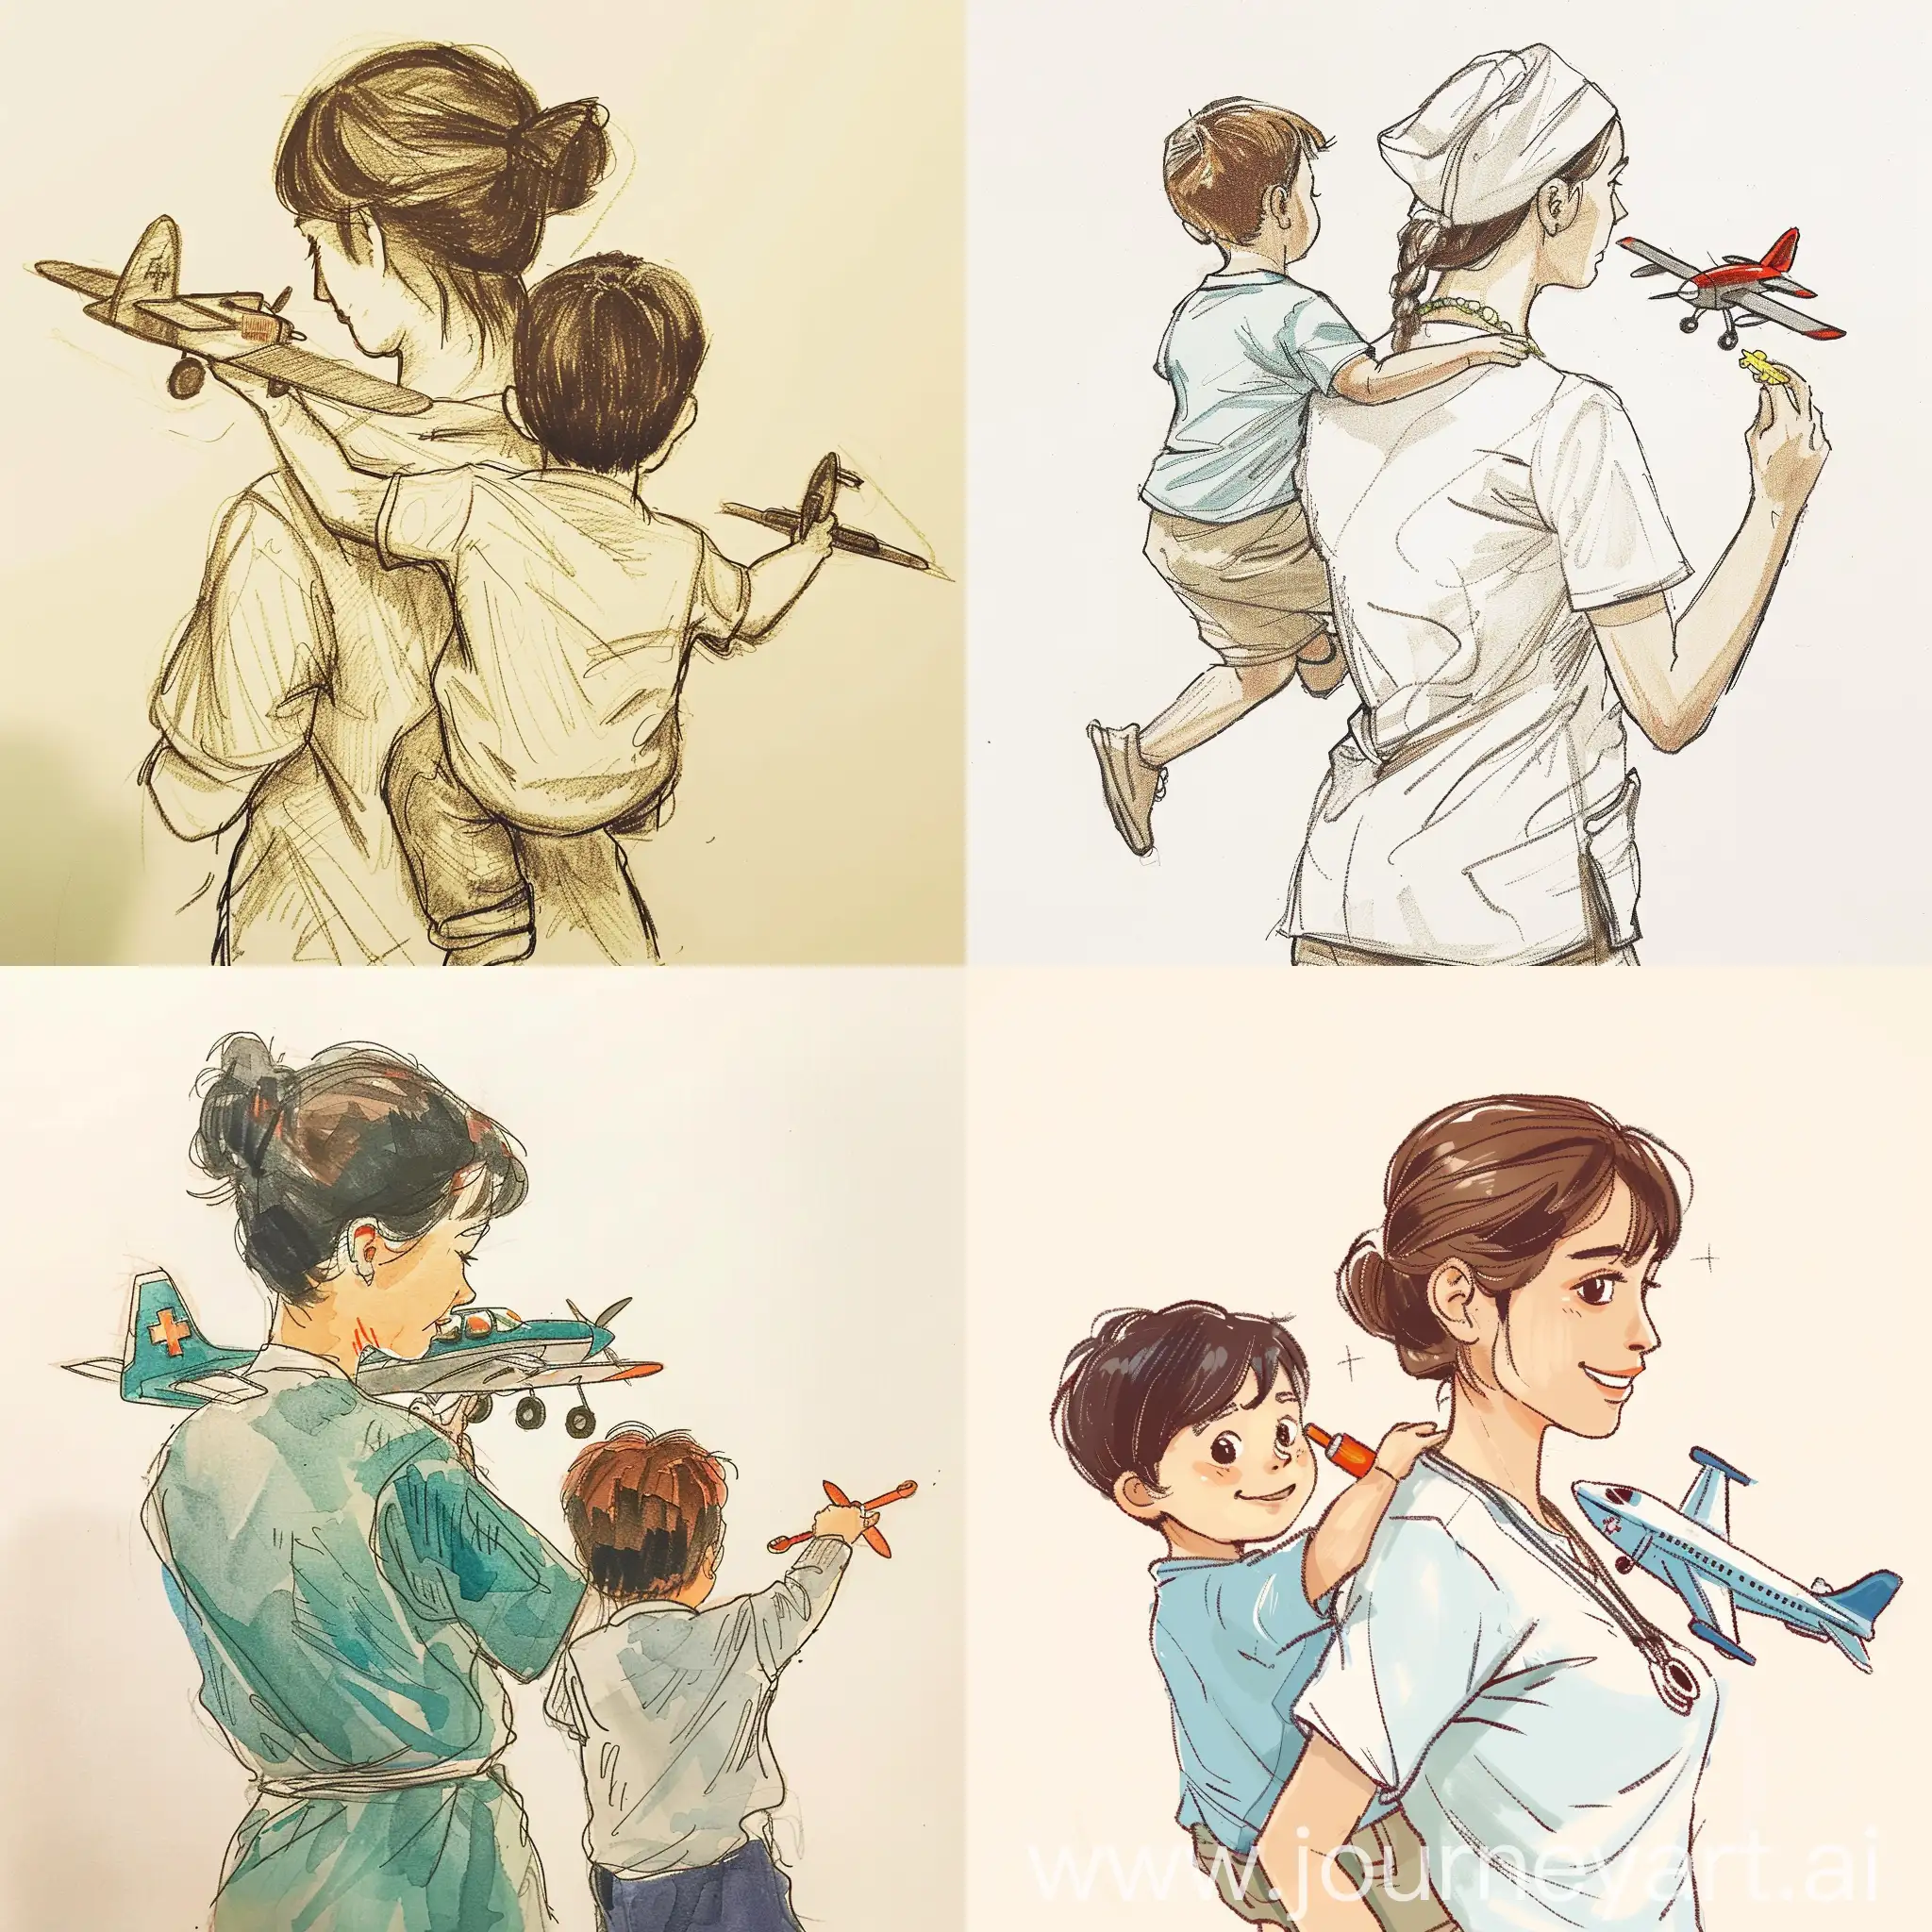 I want a simple drawing of a little boy playing with a toy plane on the back of his big sister, a adult nurse